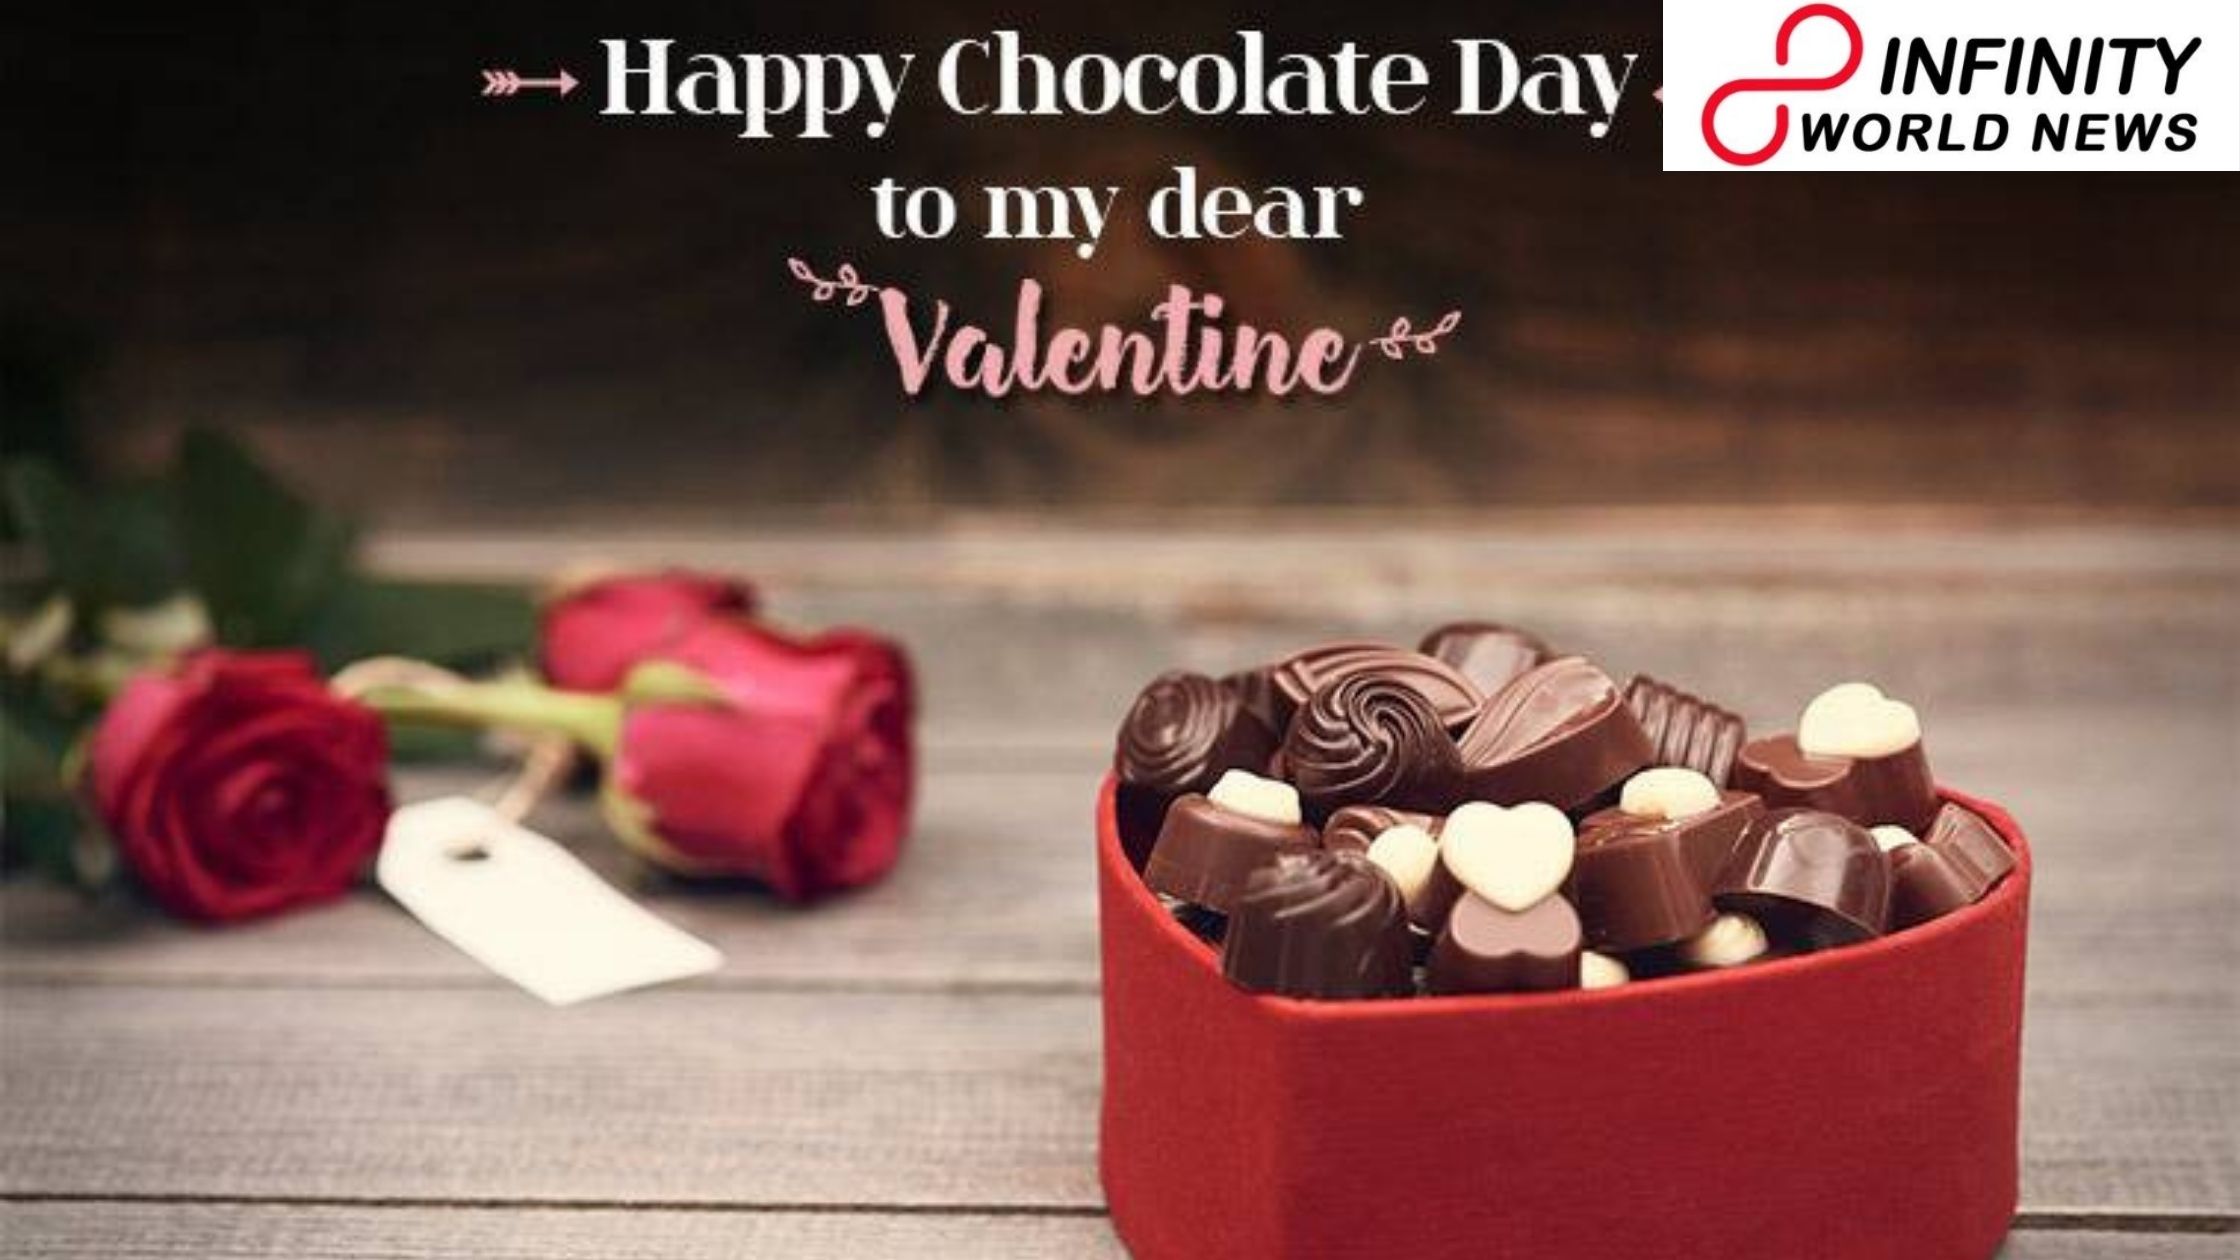 Chocolate Day 2021: The Affair Among Chocolates And Valentine's Day